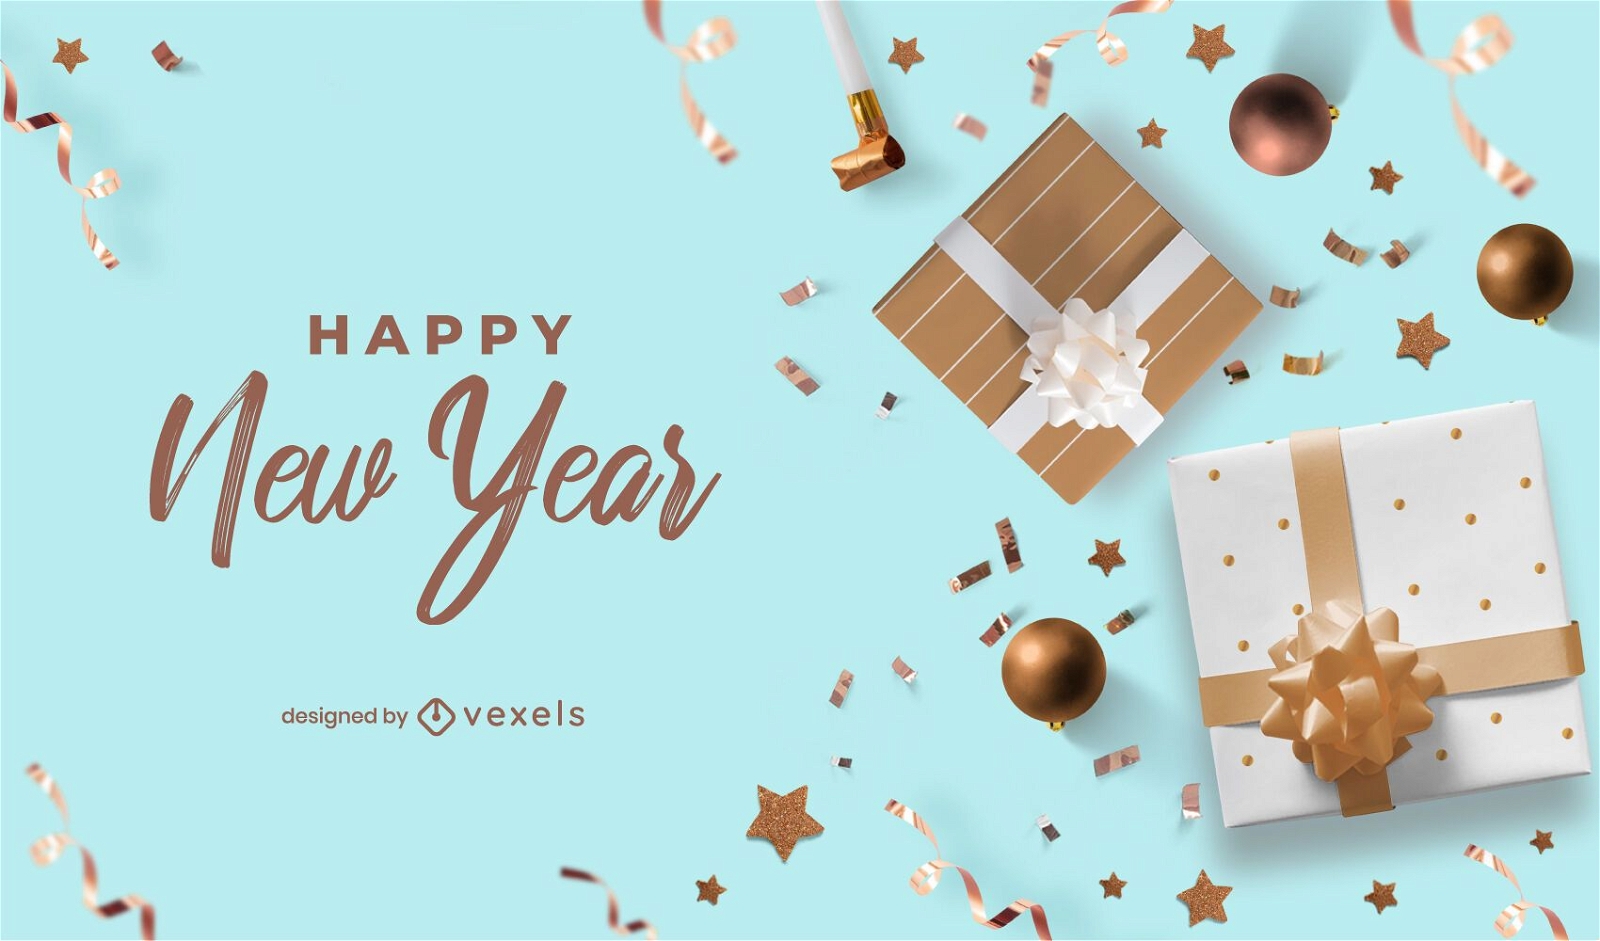 Happy New Year Party Background Design Vector Download